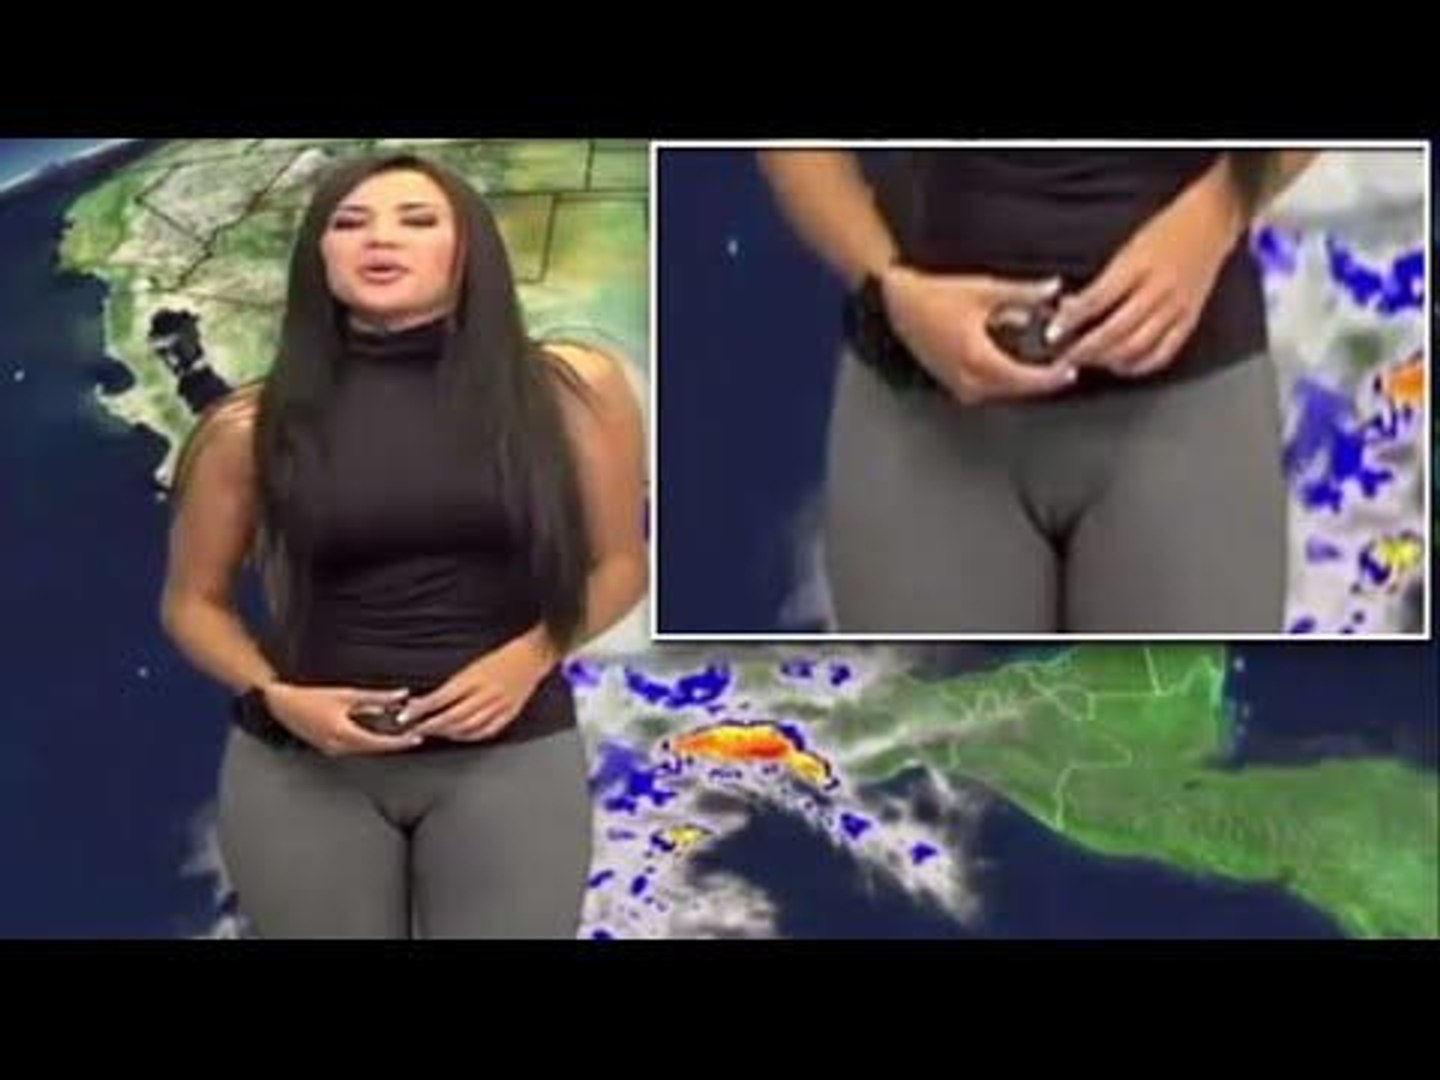 chary ann mausisa add photo mexican weather girl camel toe